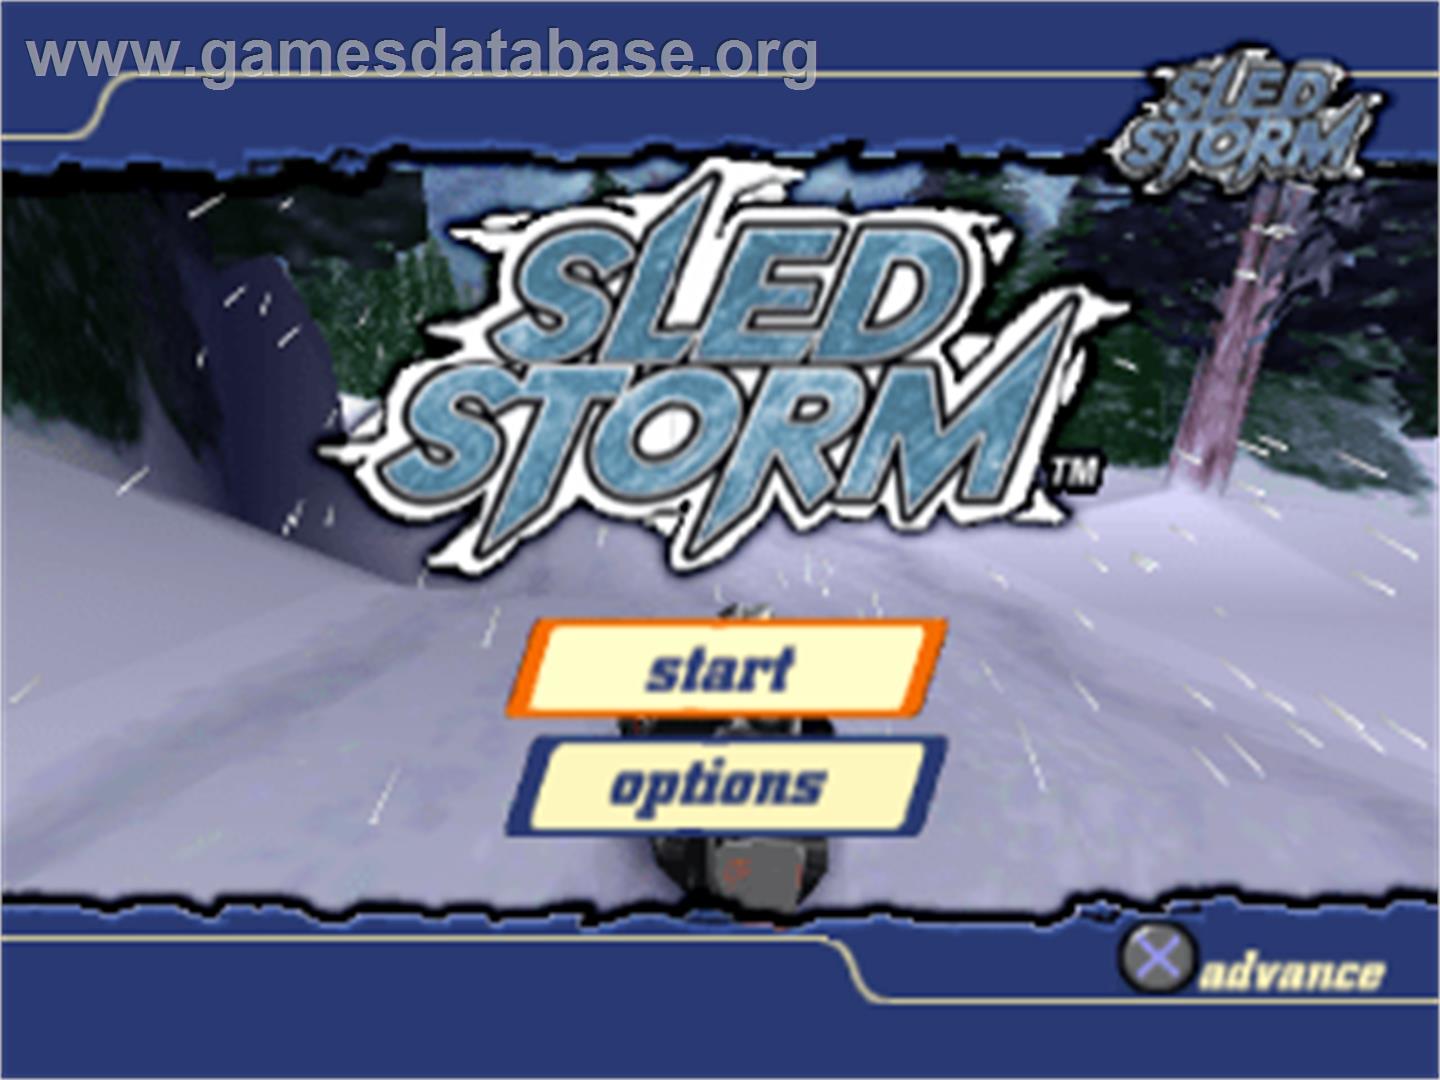 Sled Storm - Sony Playstation - Artwork - Title Screen